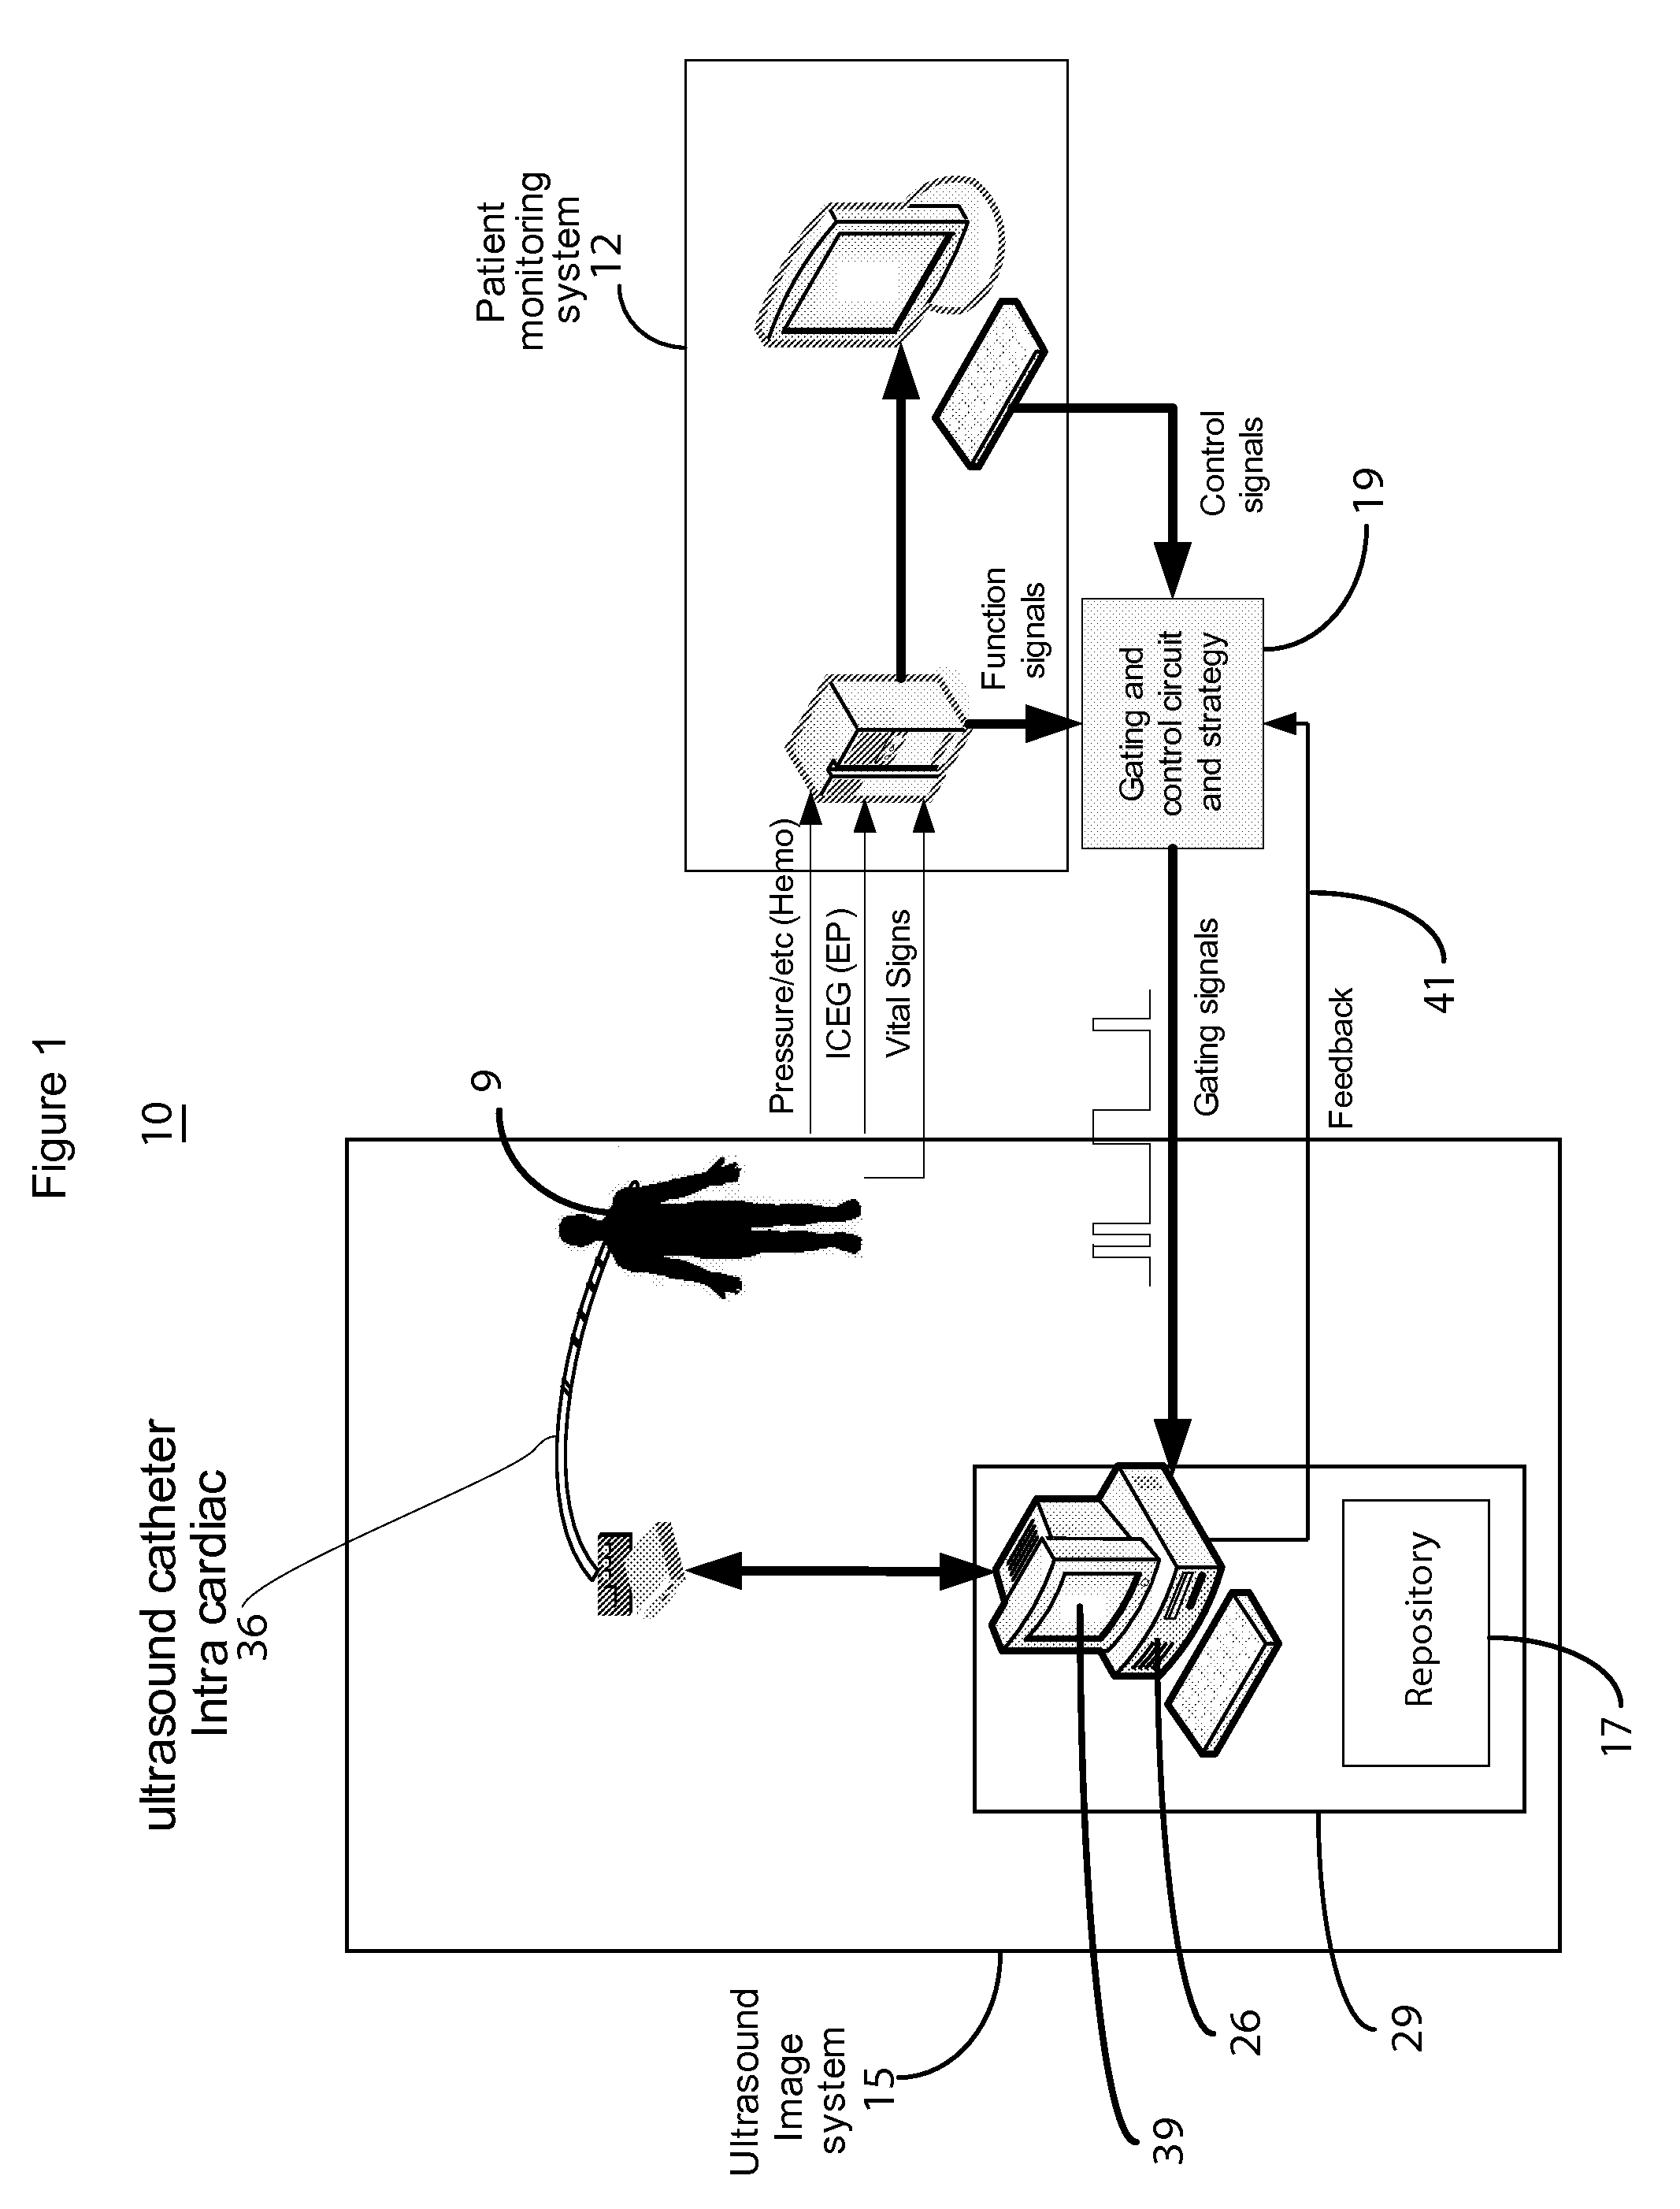 System for cardiac ultrasound image acquisition